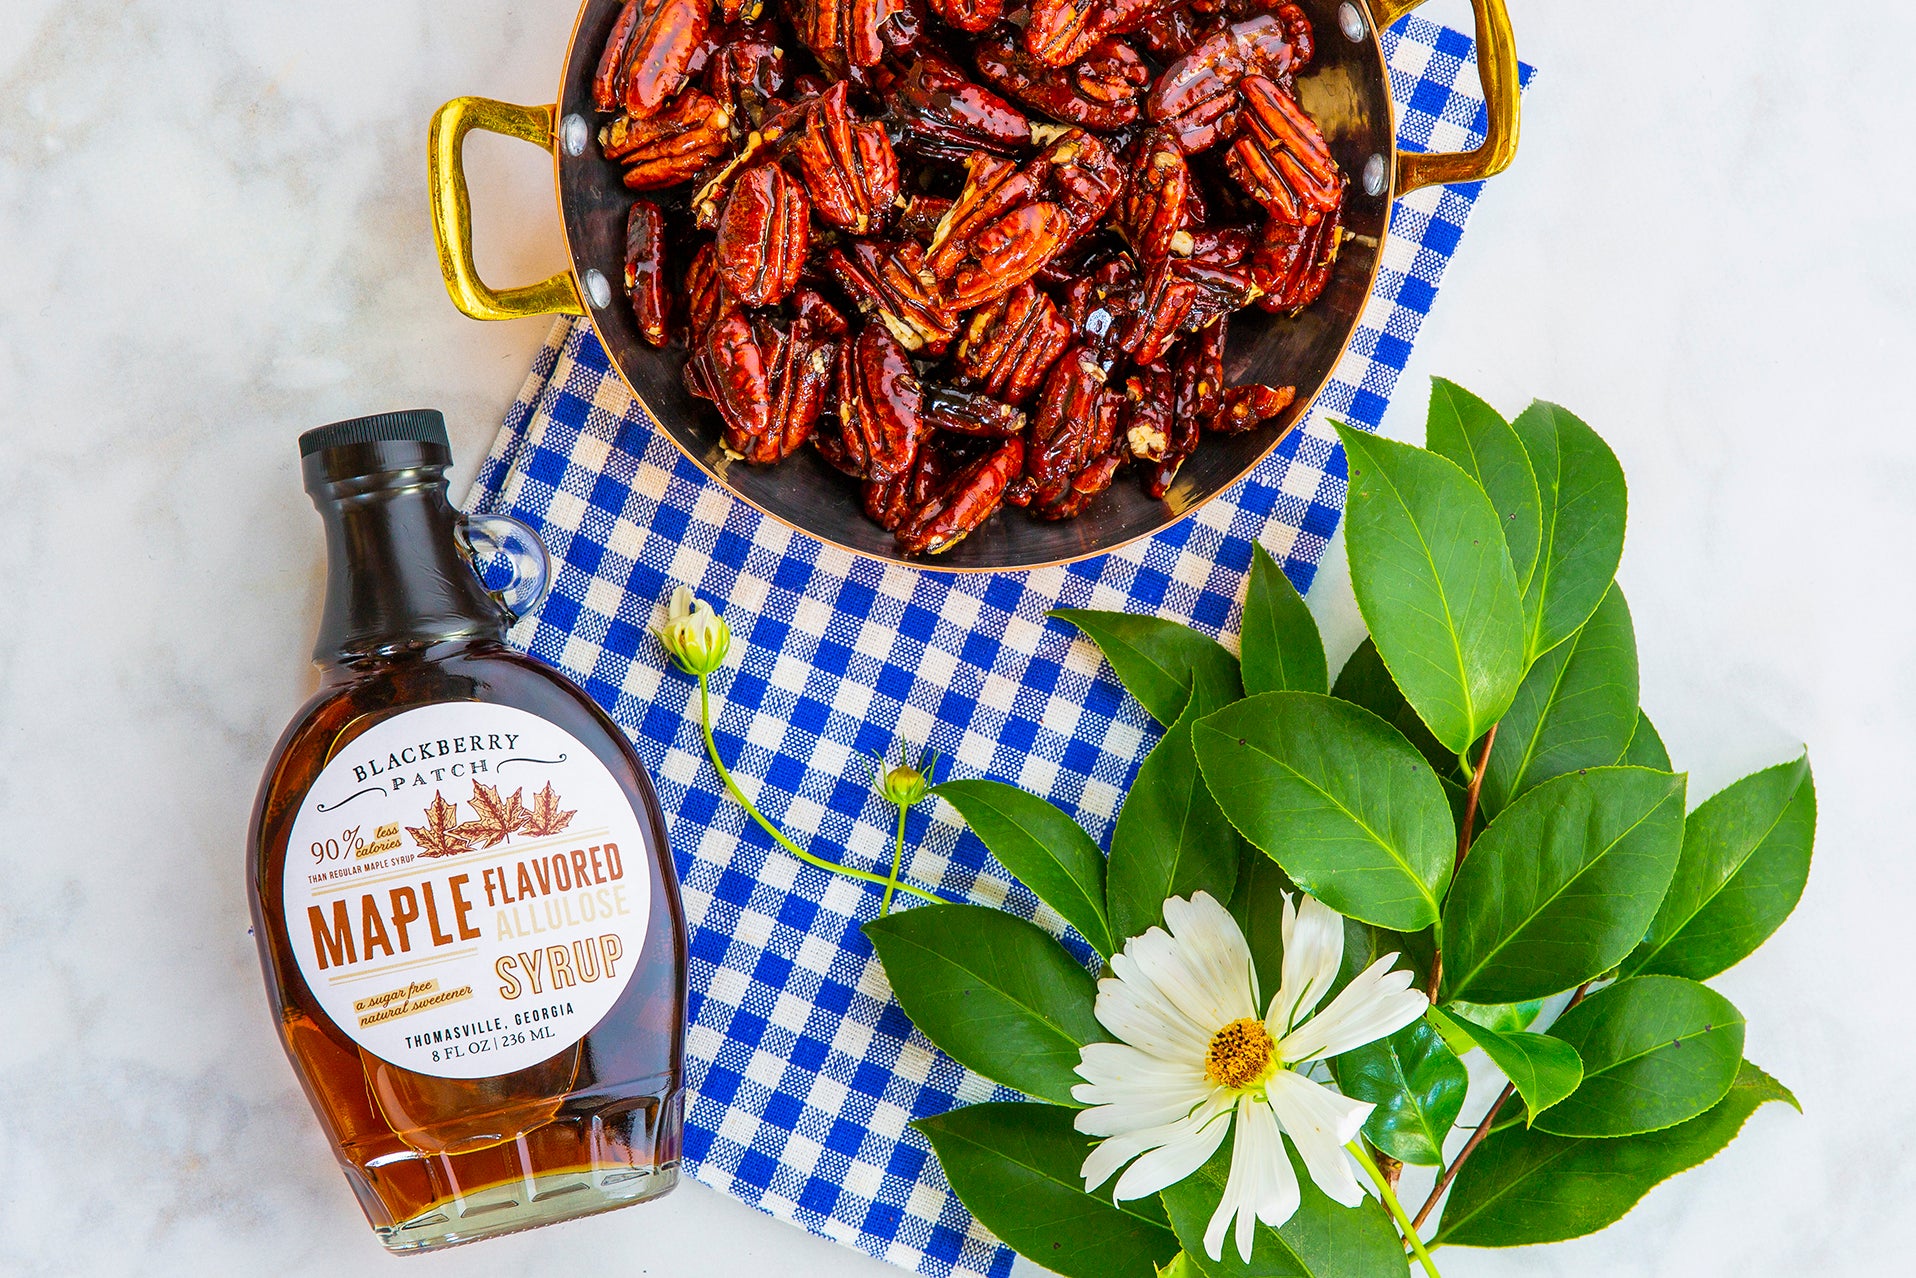 Recipe photo of Sugar Free Maple Candied Pecans using Blackberry Patch Maple Flavored Allulose Syrup